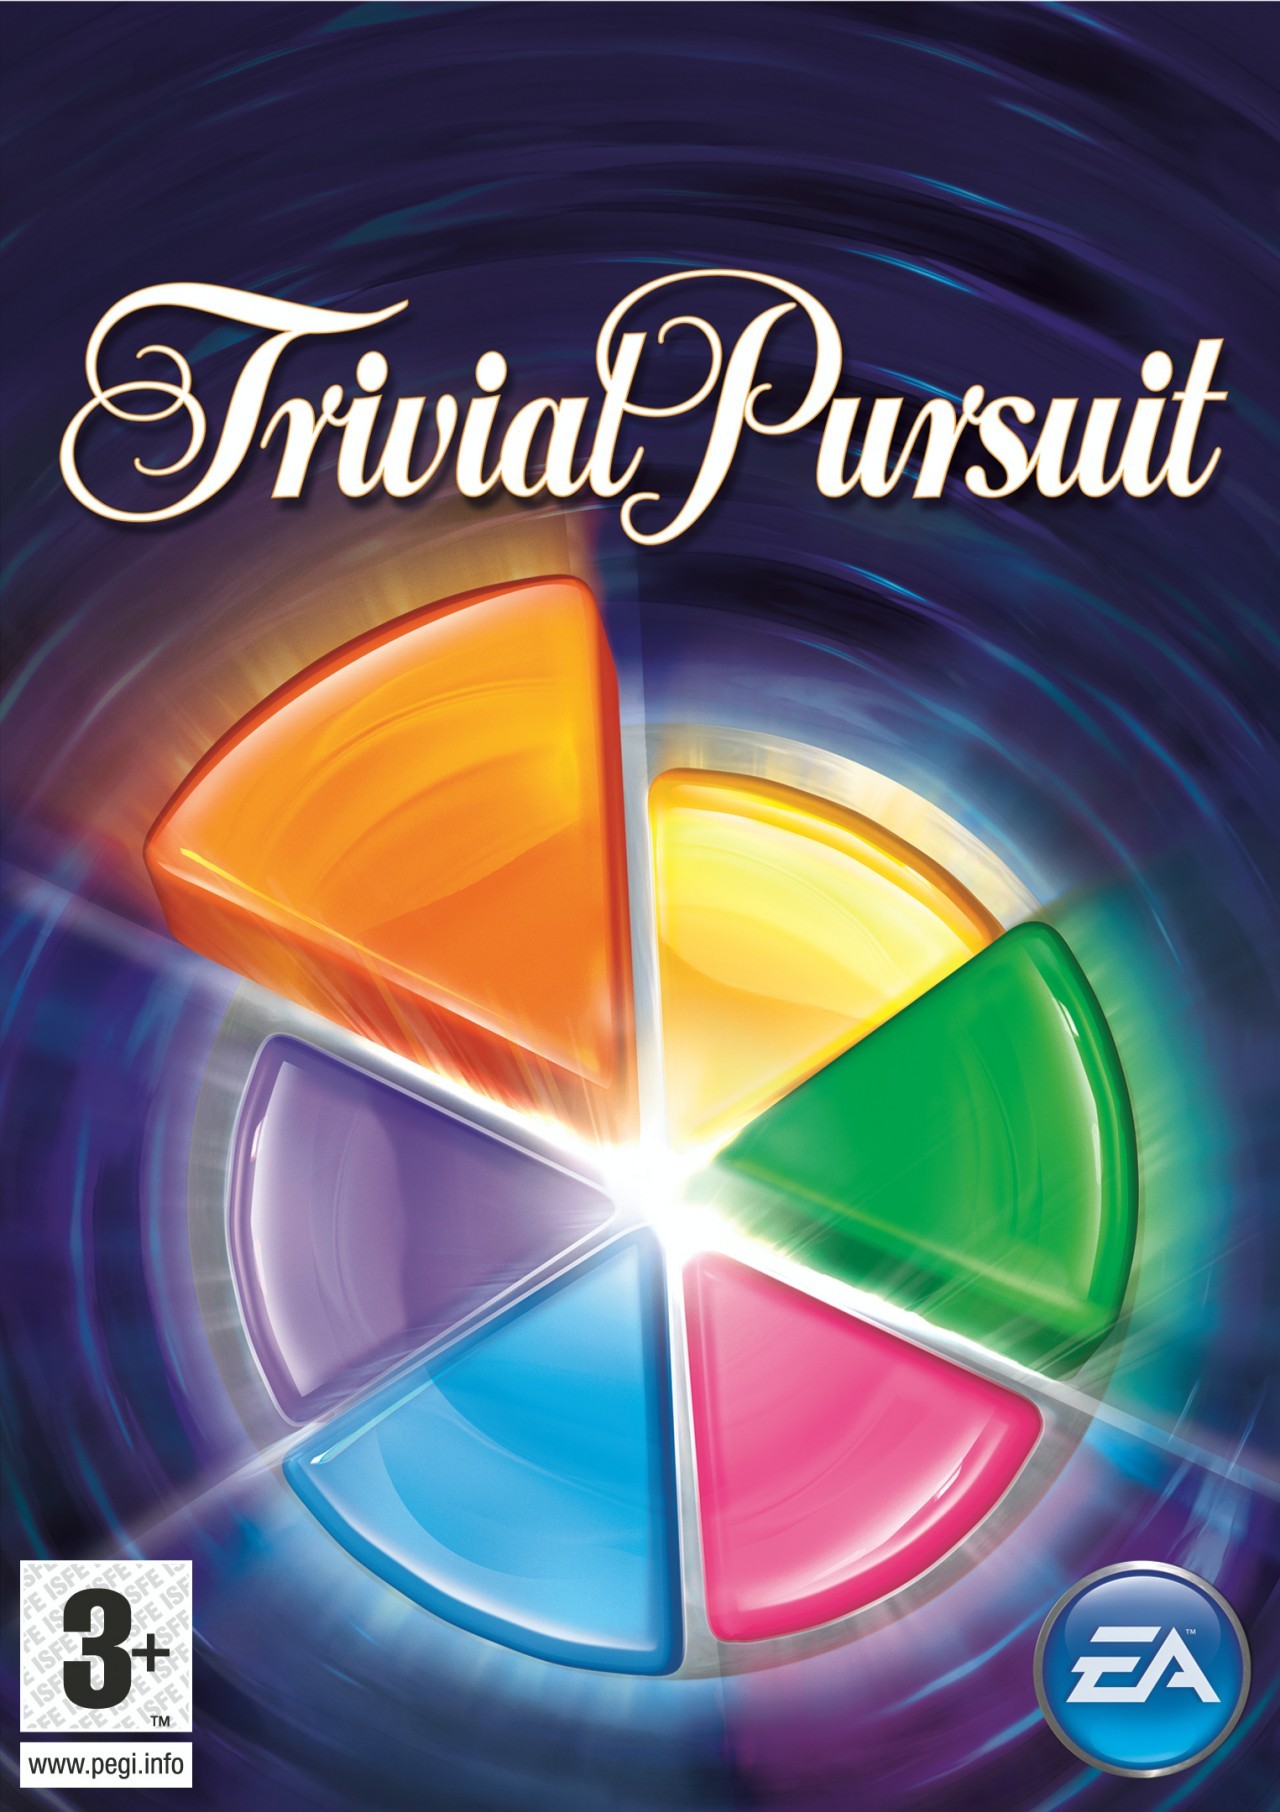 trivial pursuit daily 20 answers